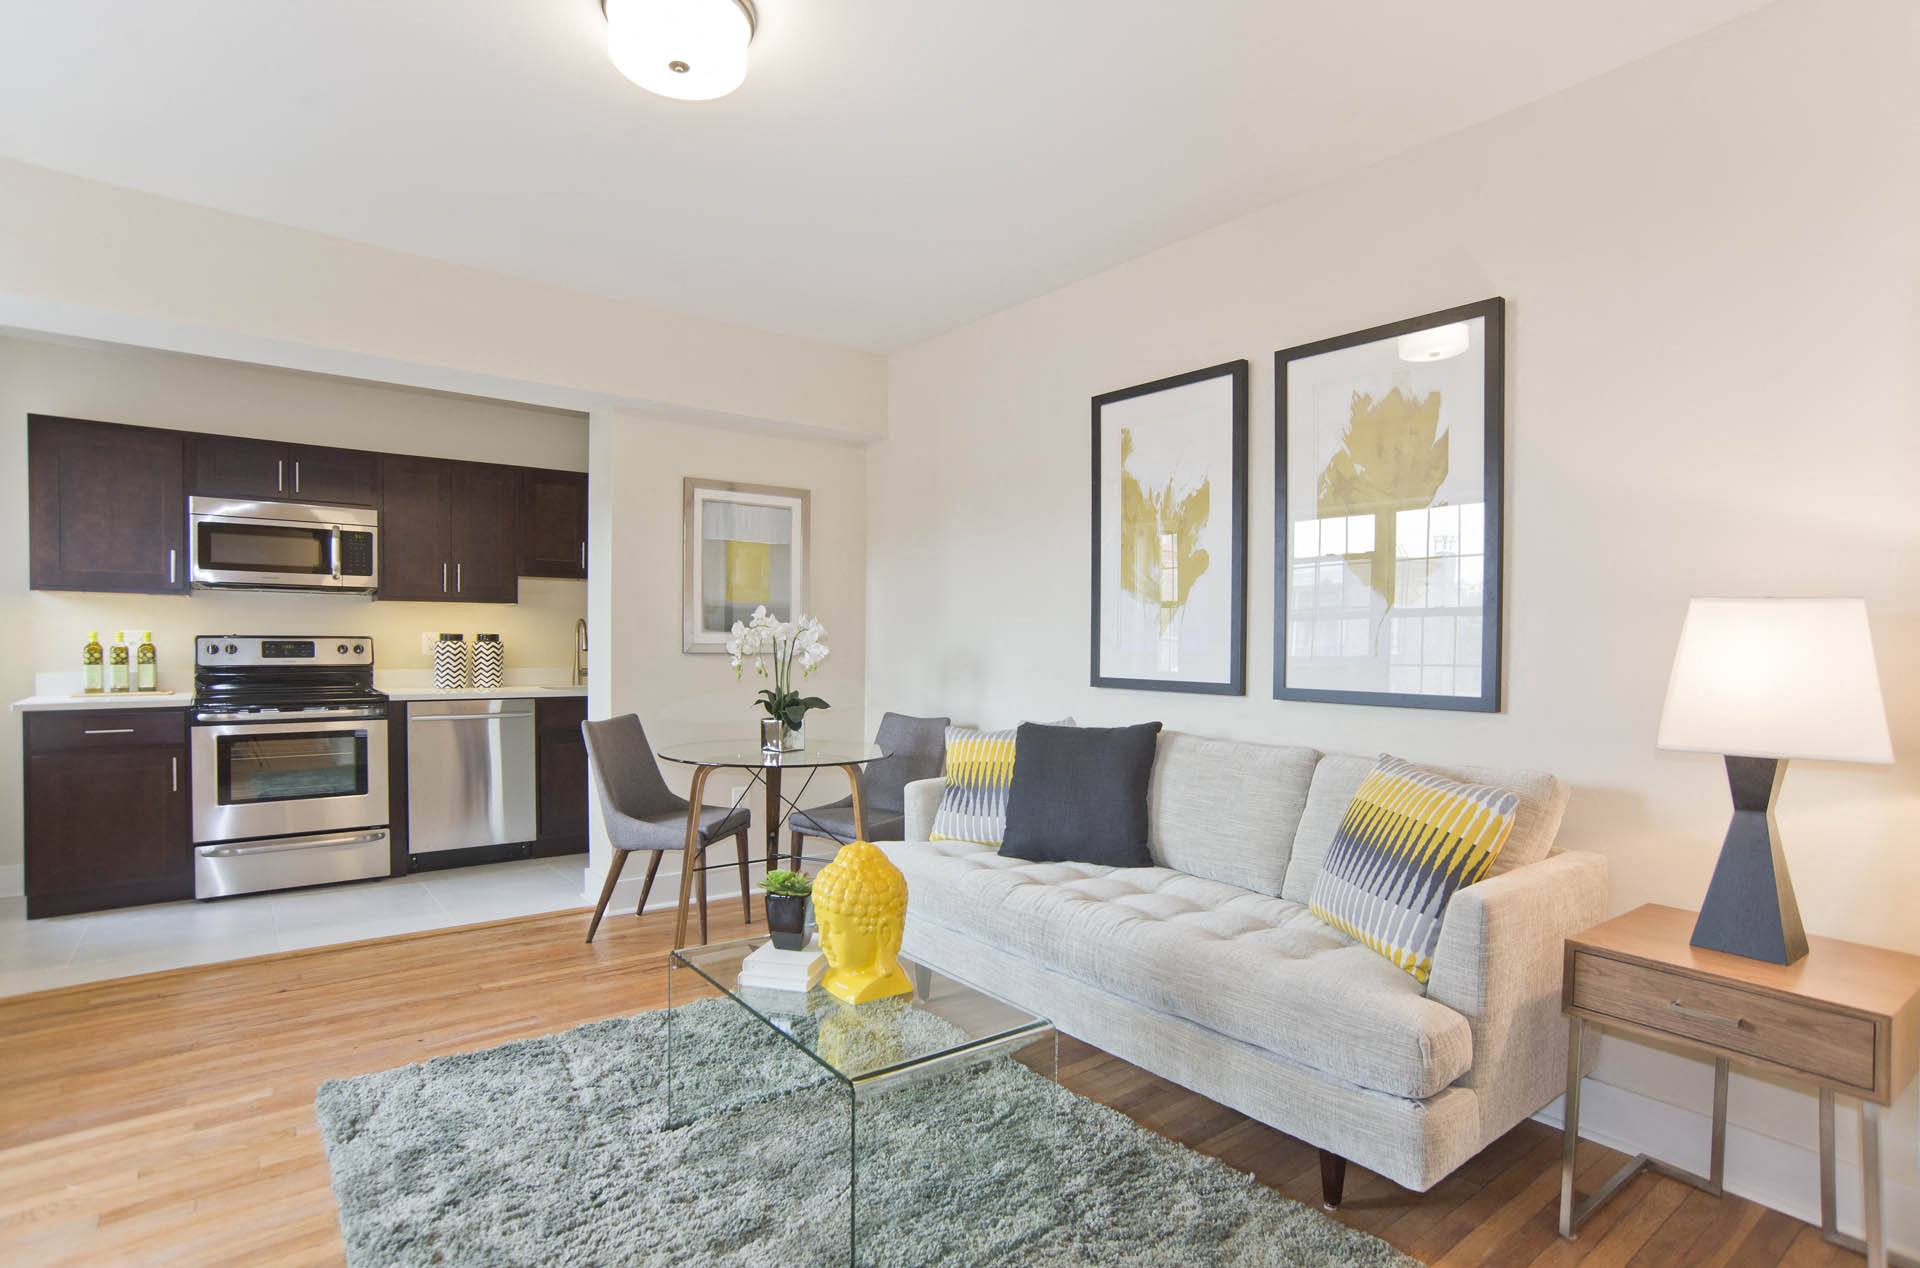 100 Best Apartments in Washington, DC (with reviews) | RentCafe